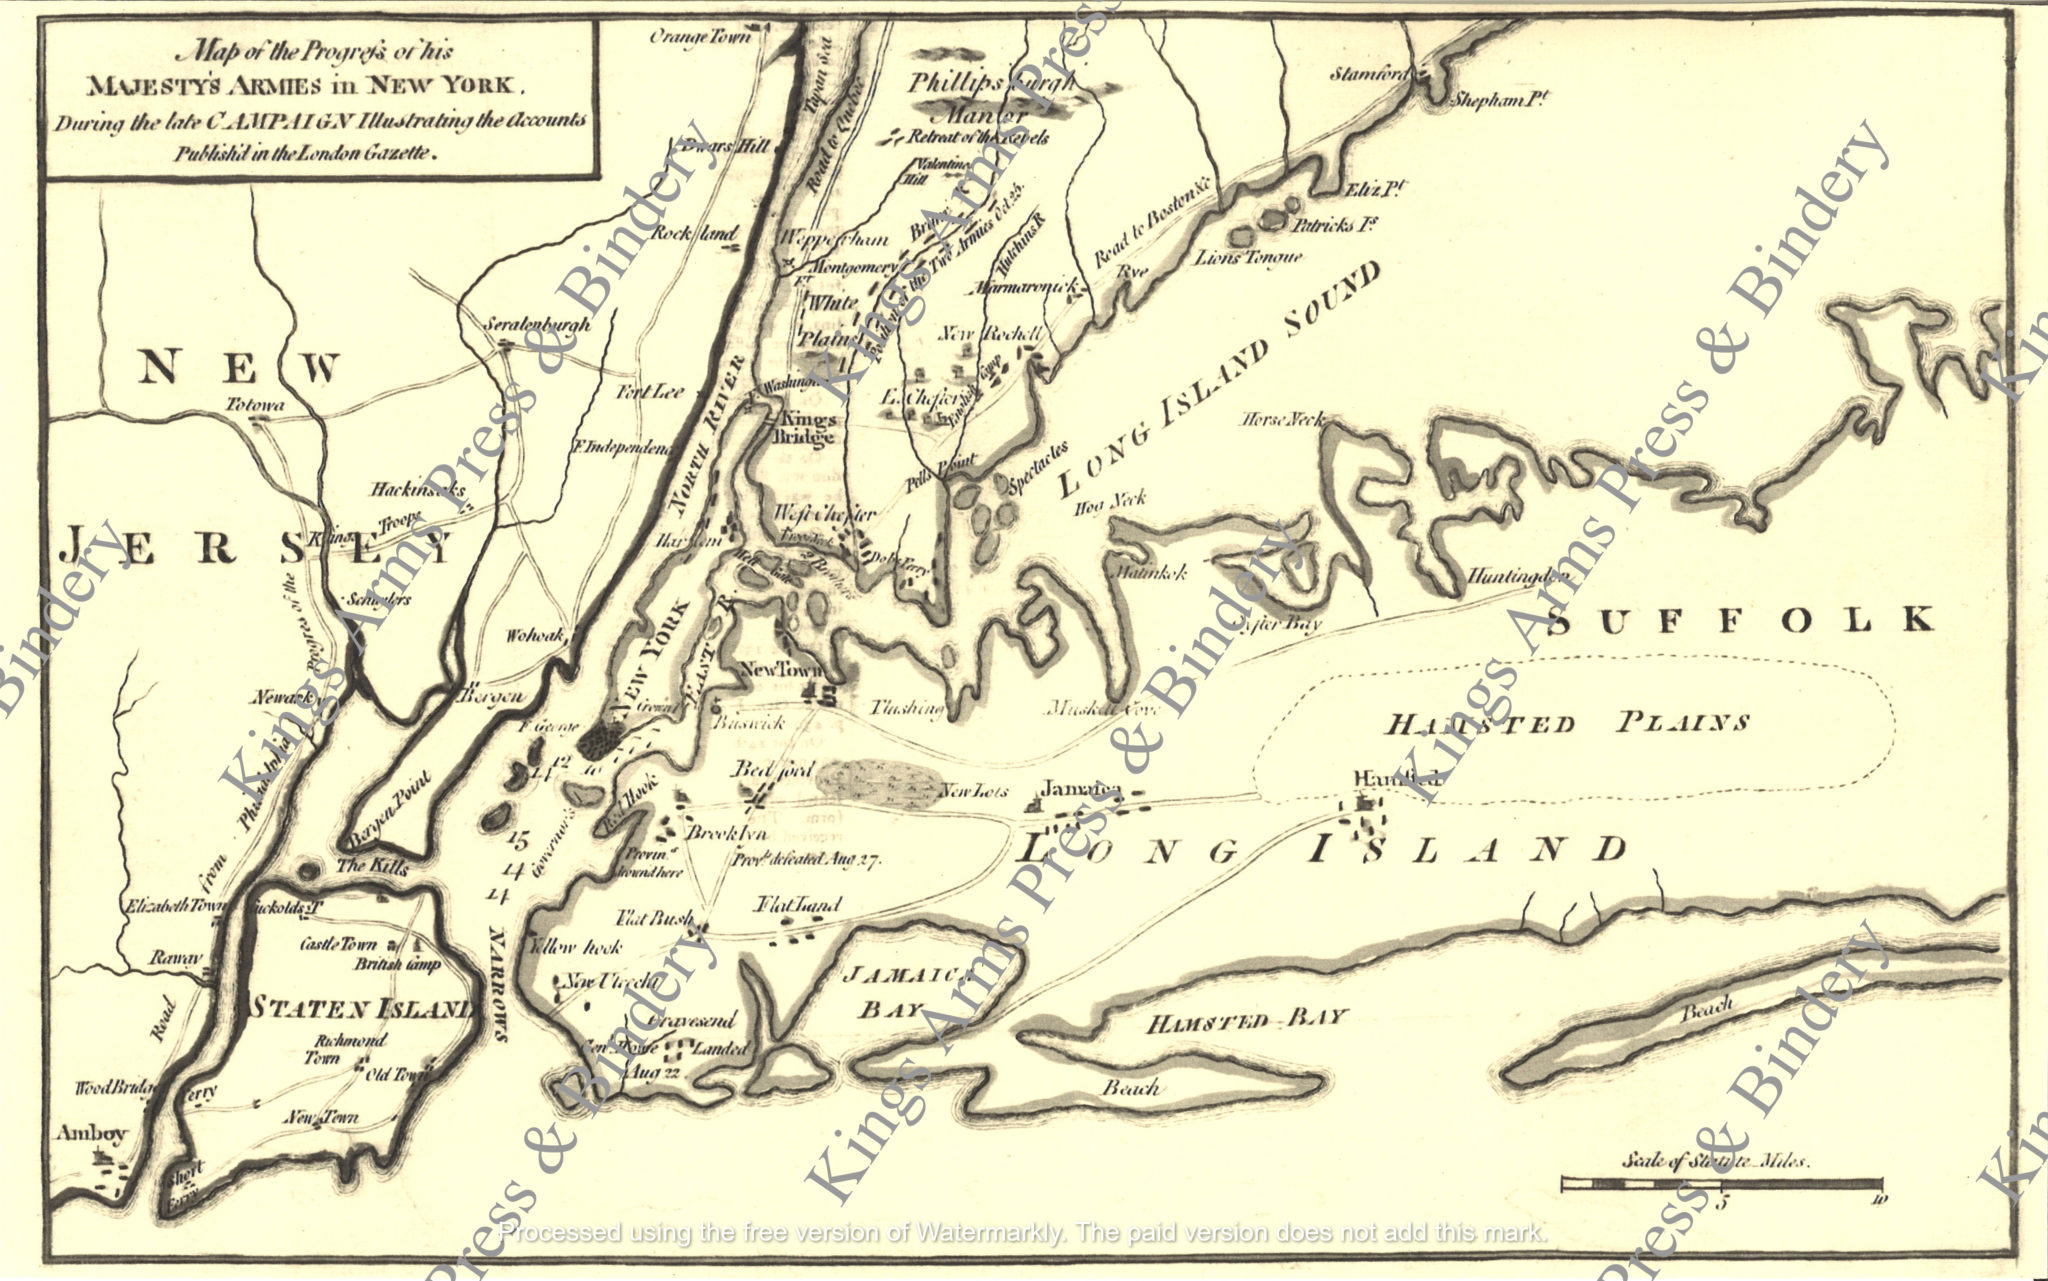 Map of the Progress of His Majesty’s Army in New York-1776